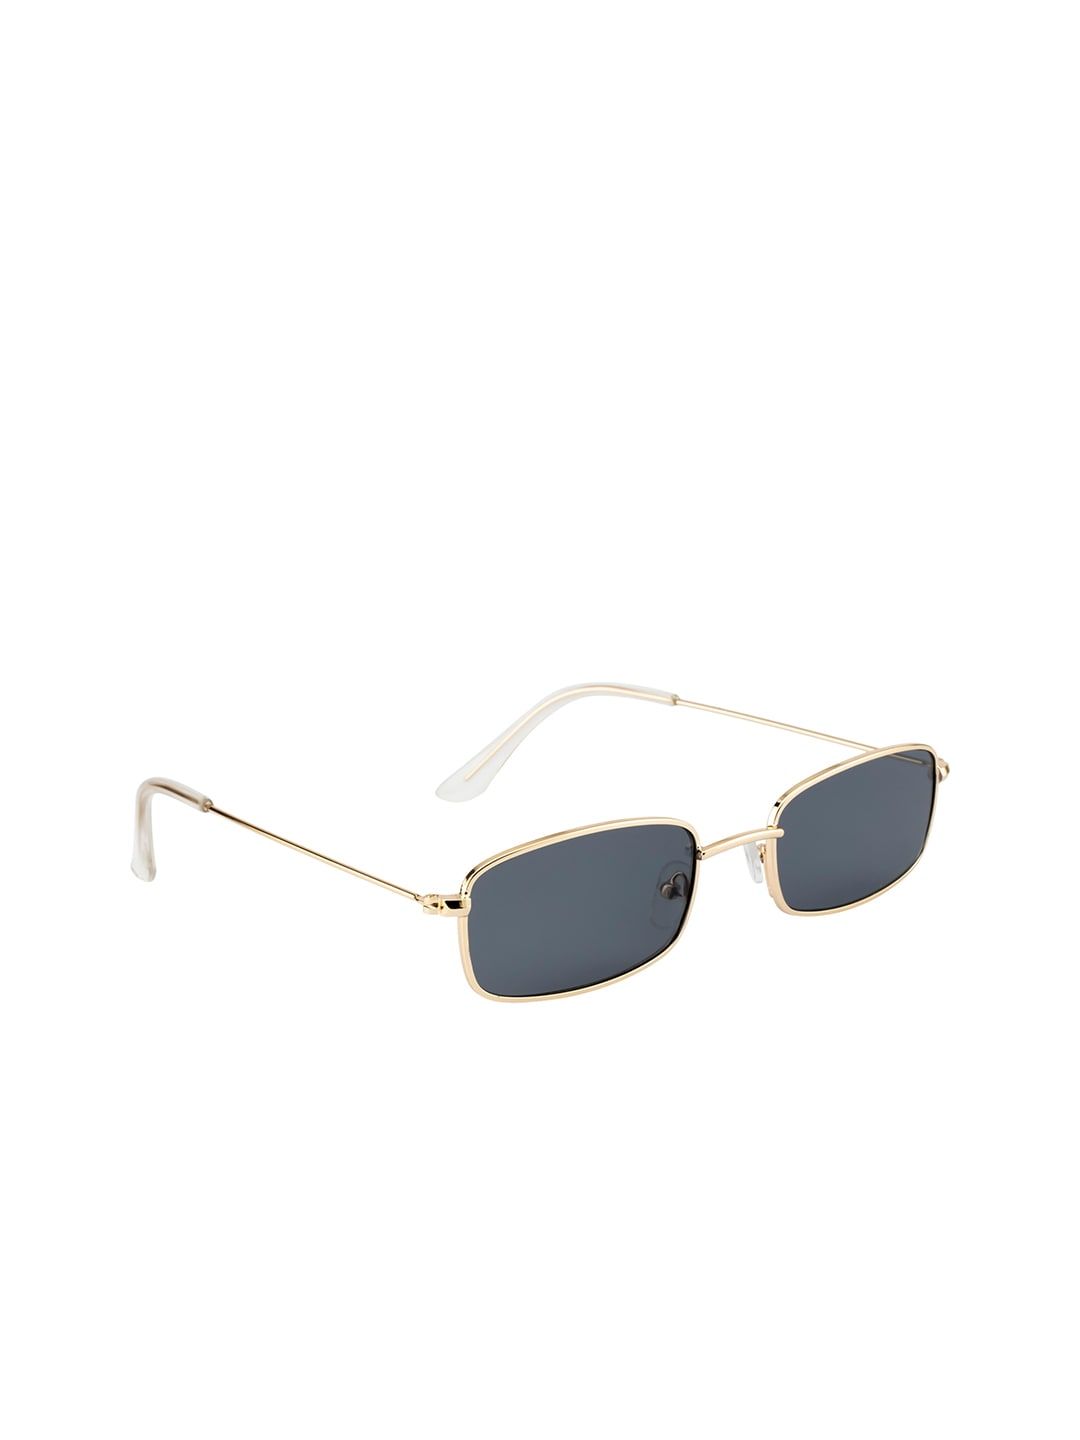 Ted Smith Unisex Grey Lens & Gold-Toned Rectangle Sunglasses With UV Protected Lens Price in India